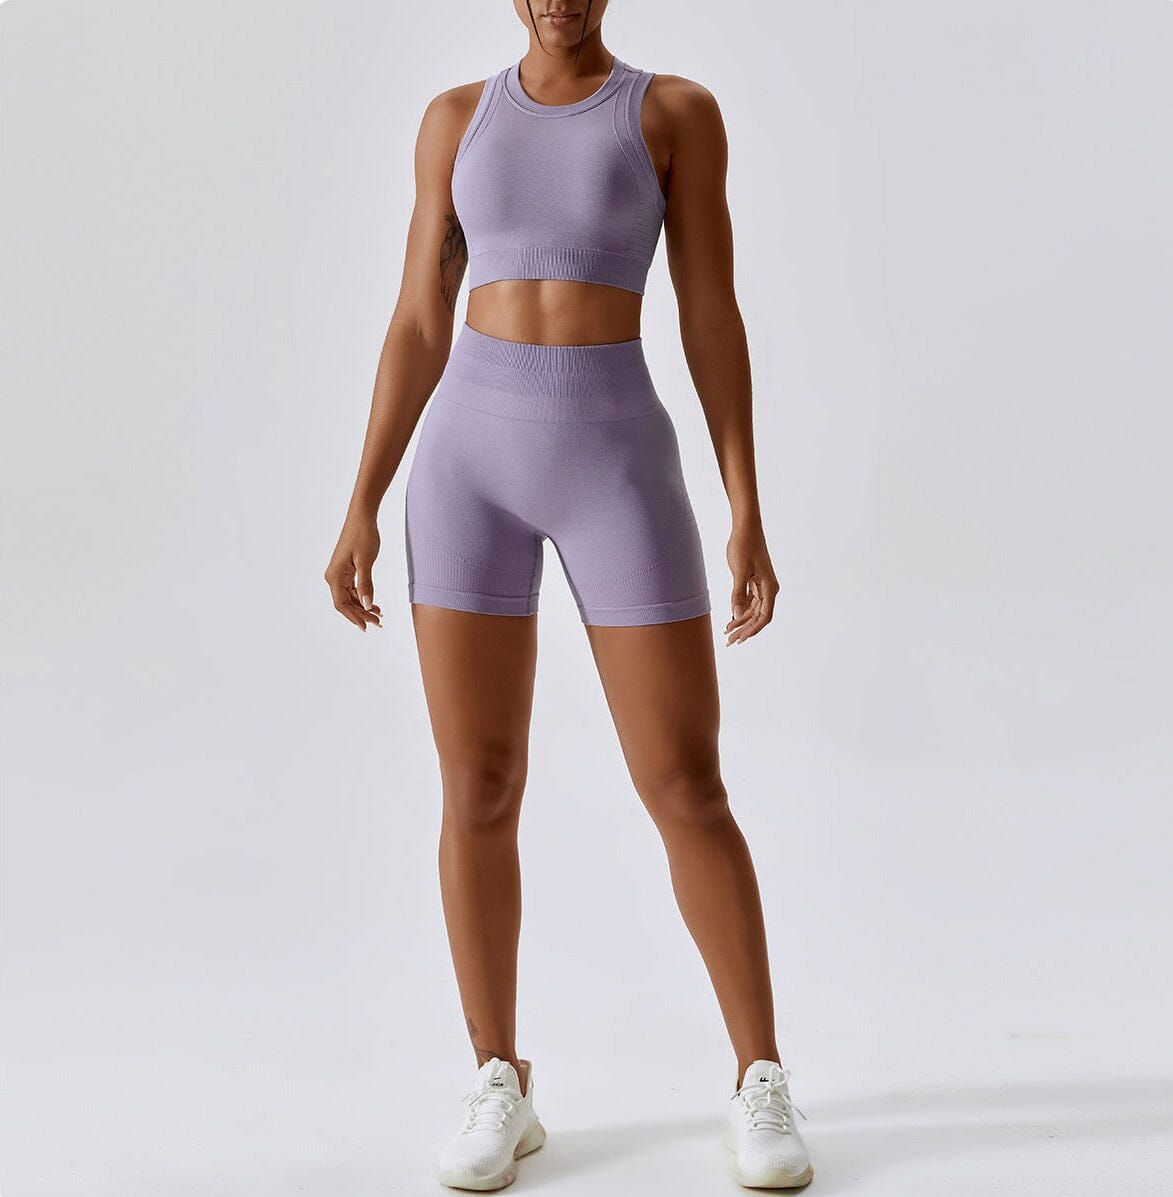 Intricate Gym Set - Shorts + Top Sets Starlethics 